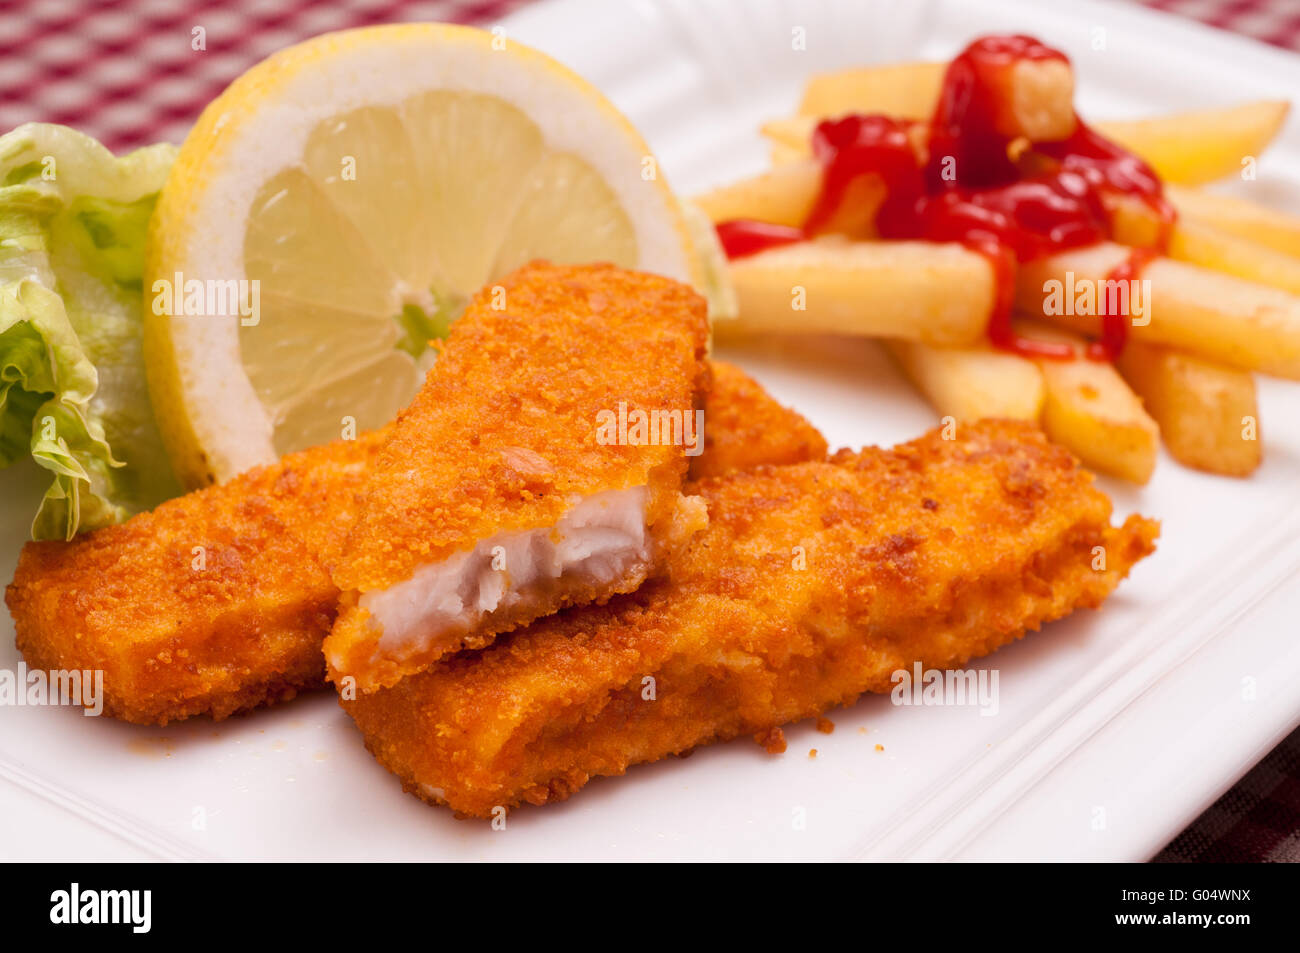 Breaded fish sticks with french fries and ketchup Stock Photo